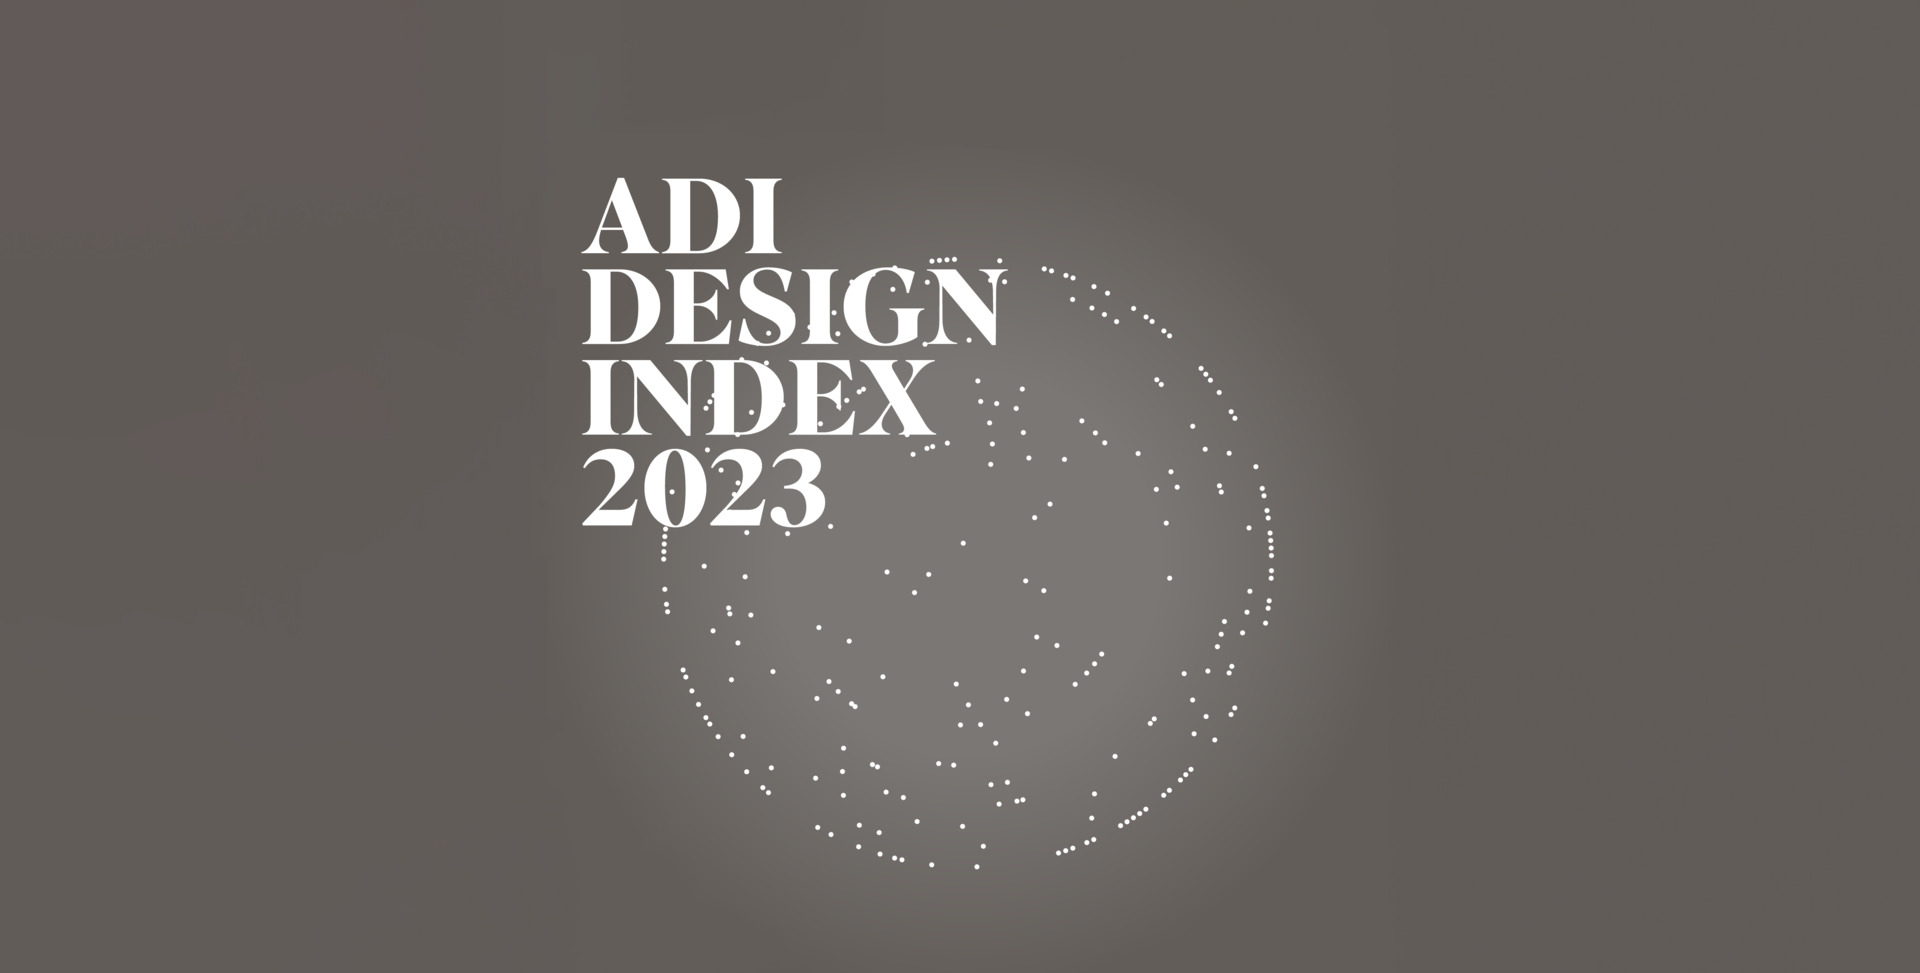 Image of the ADI DESIGN INDEX 2023 logo, in the centre a world made of white dots on a grey background.